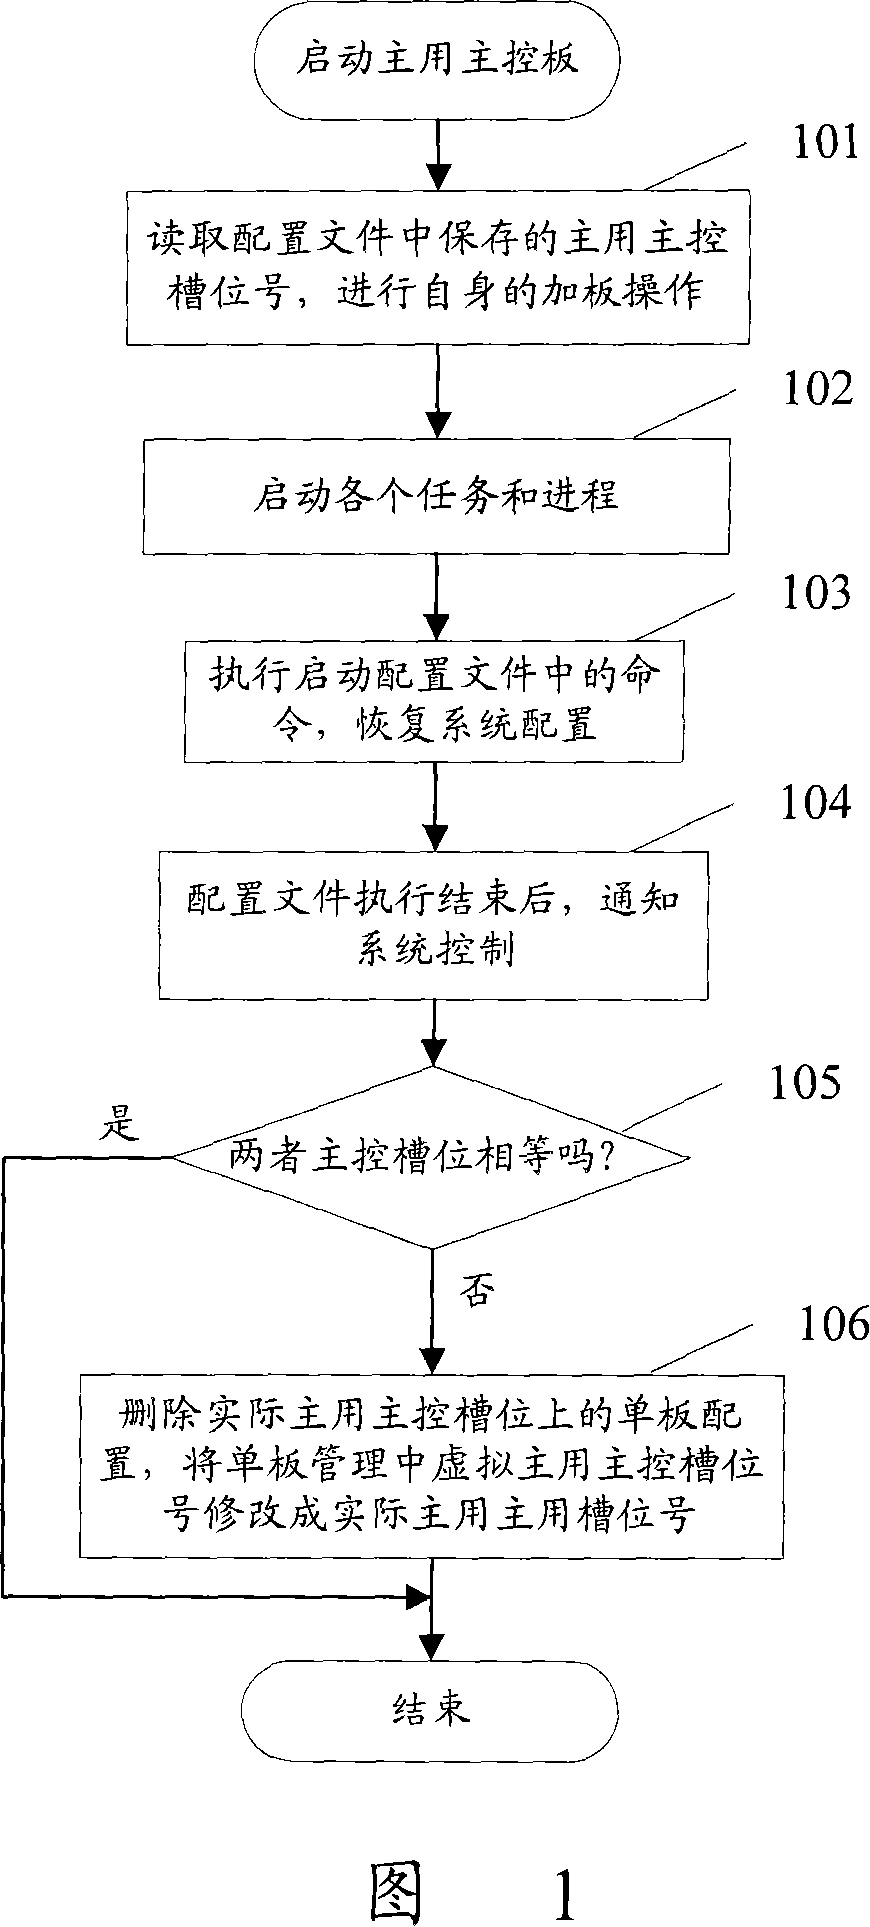 Method for device configuration recovery using configuration file under mixed insertion condition